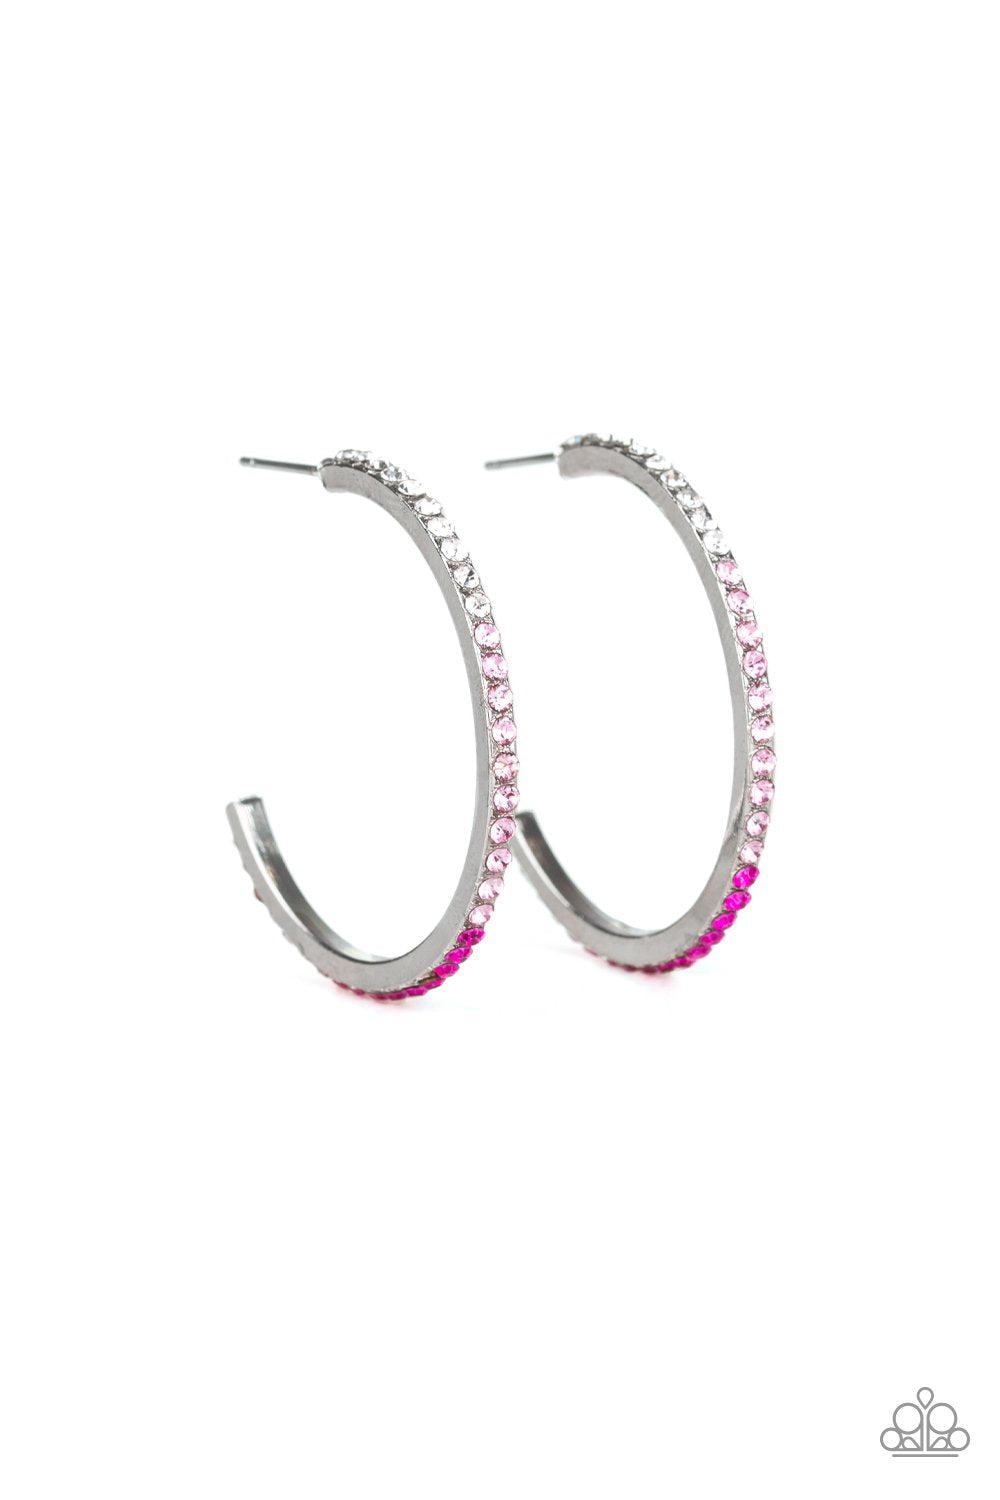 Rhinestone Revamp Pink Ombre Hoop Earrings - Paparazzi Accessories-CarasShop.com - $5 Jewelry by Cara Jewels